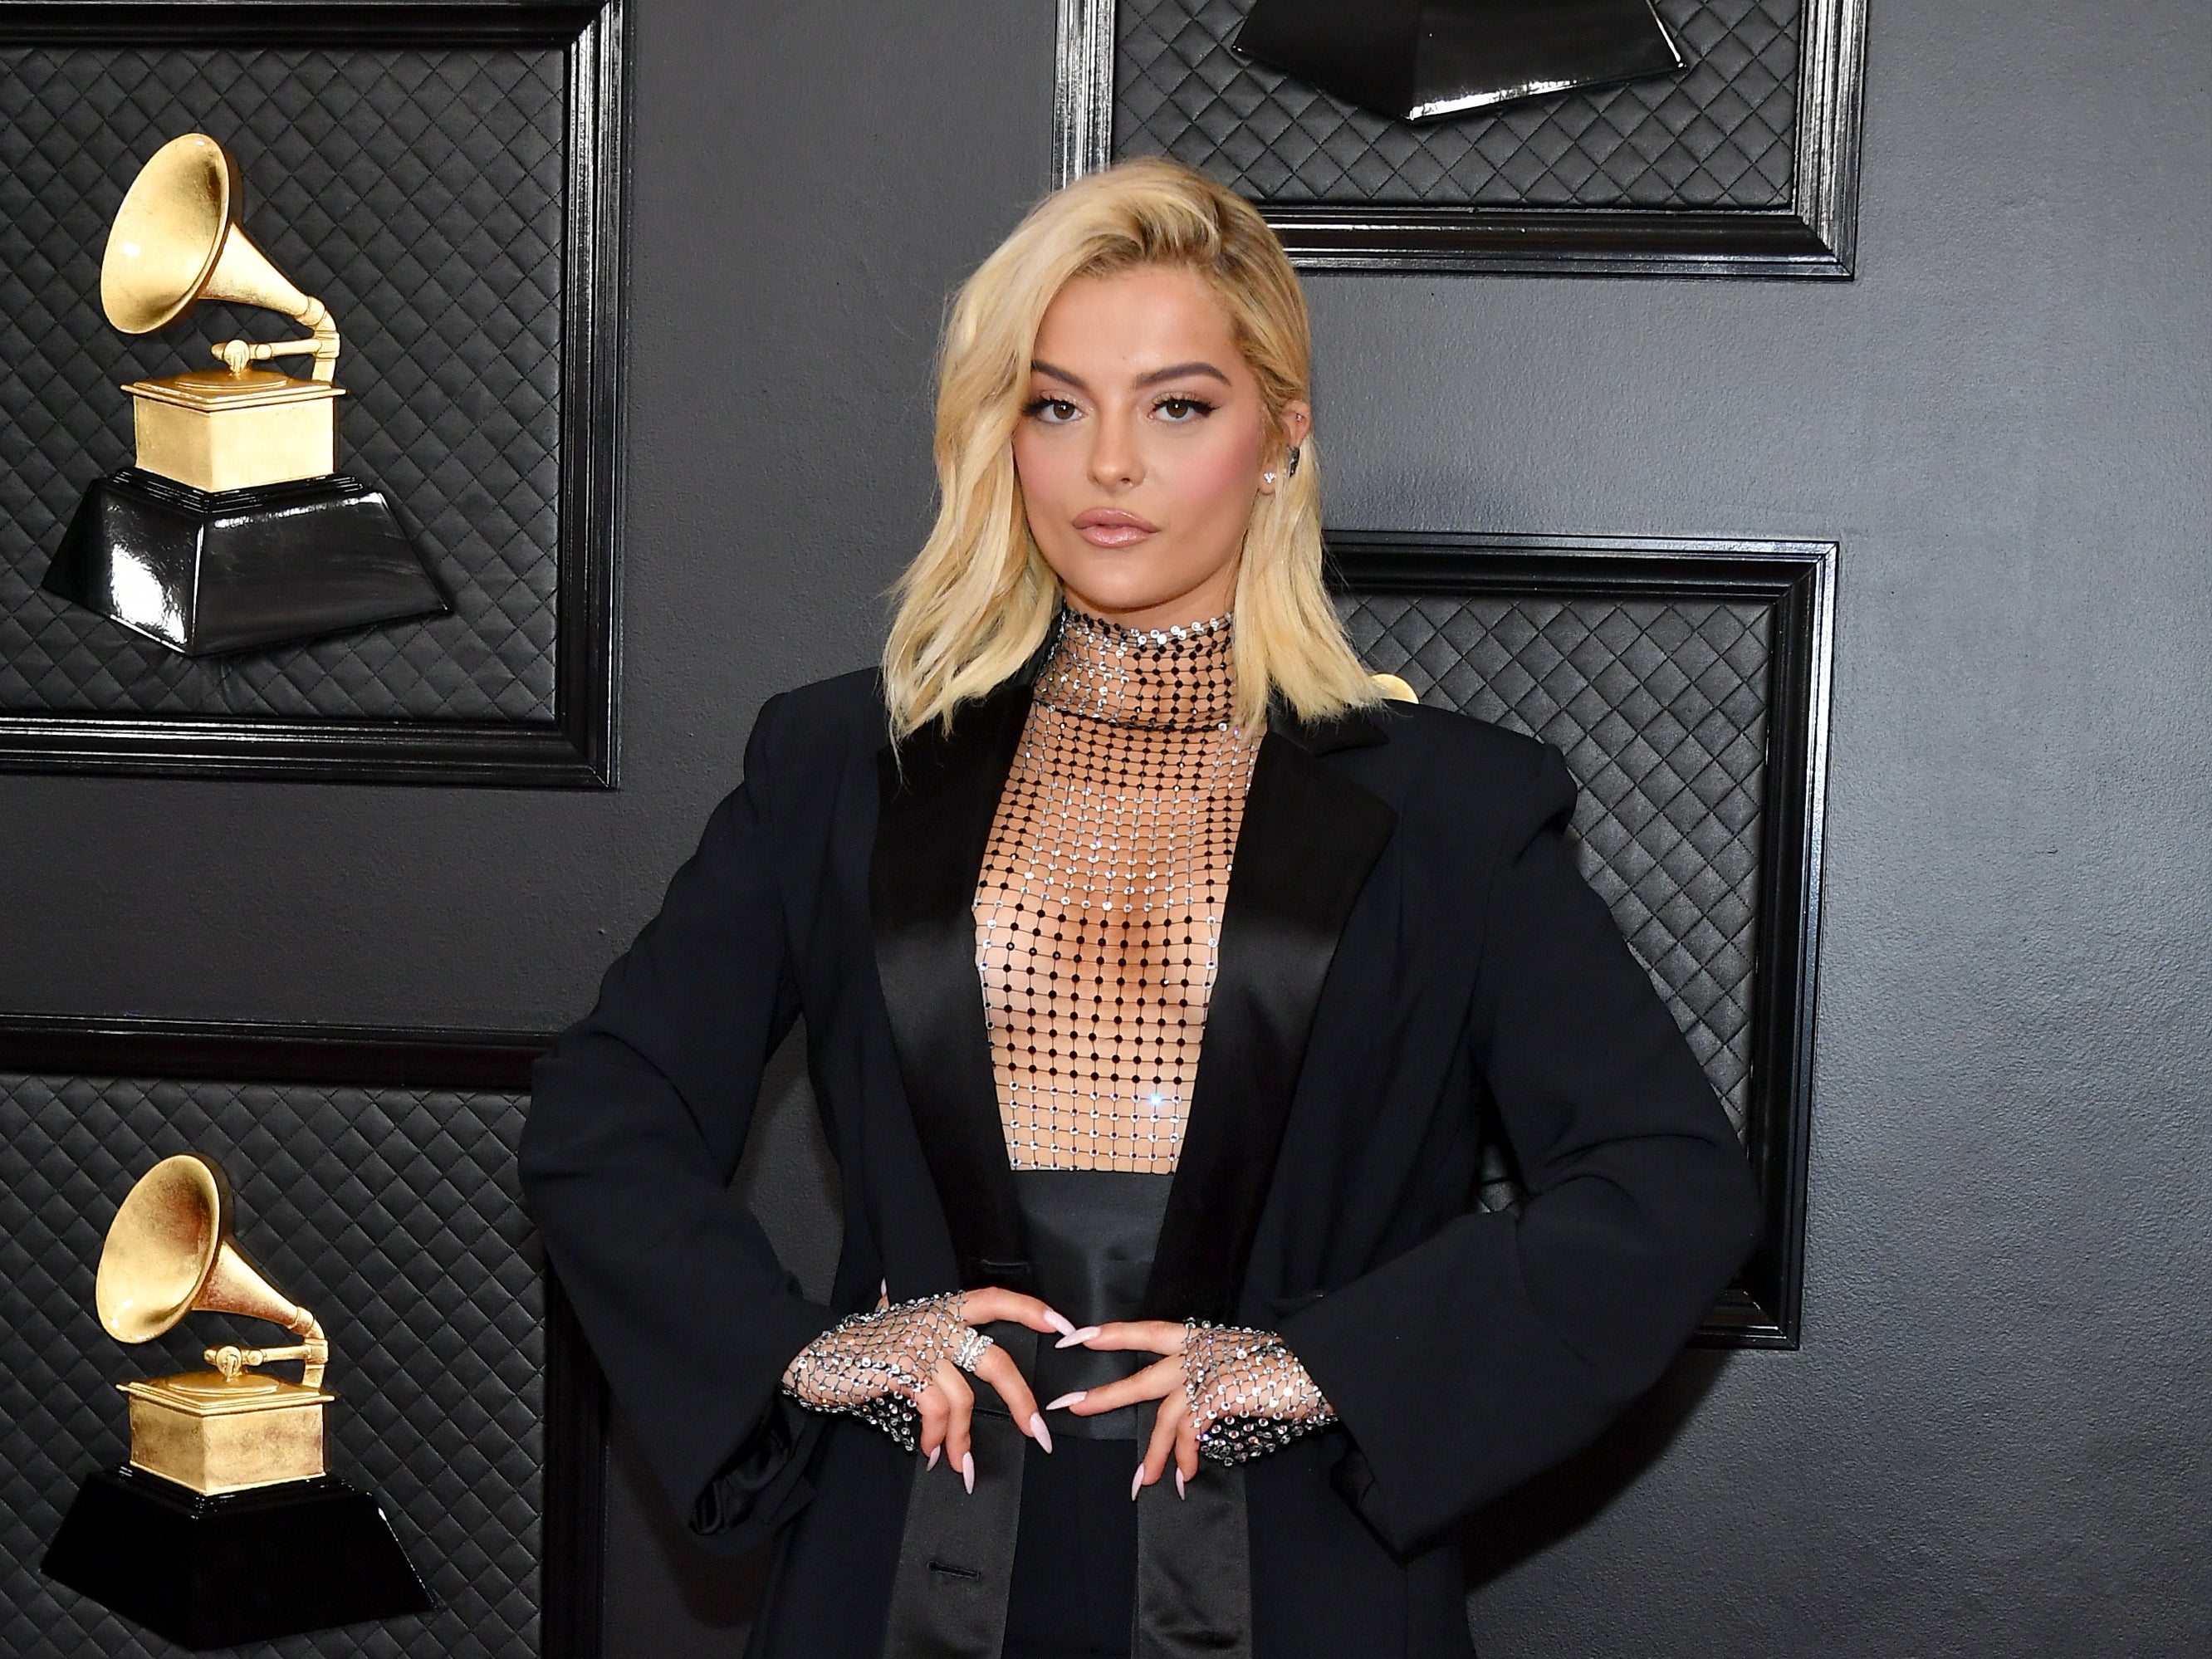 Bebe Rexha shares candid video about body image struggles